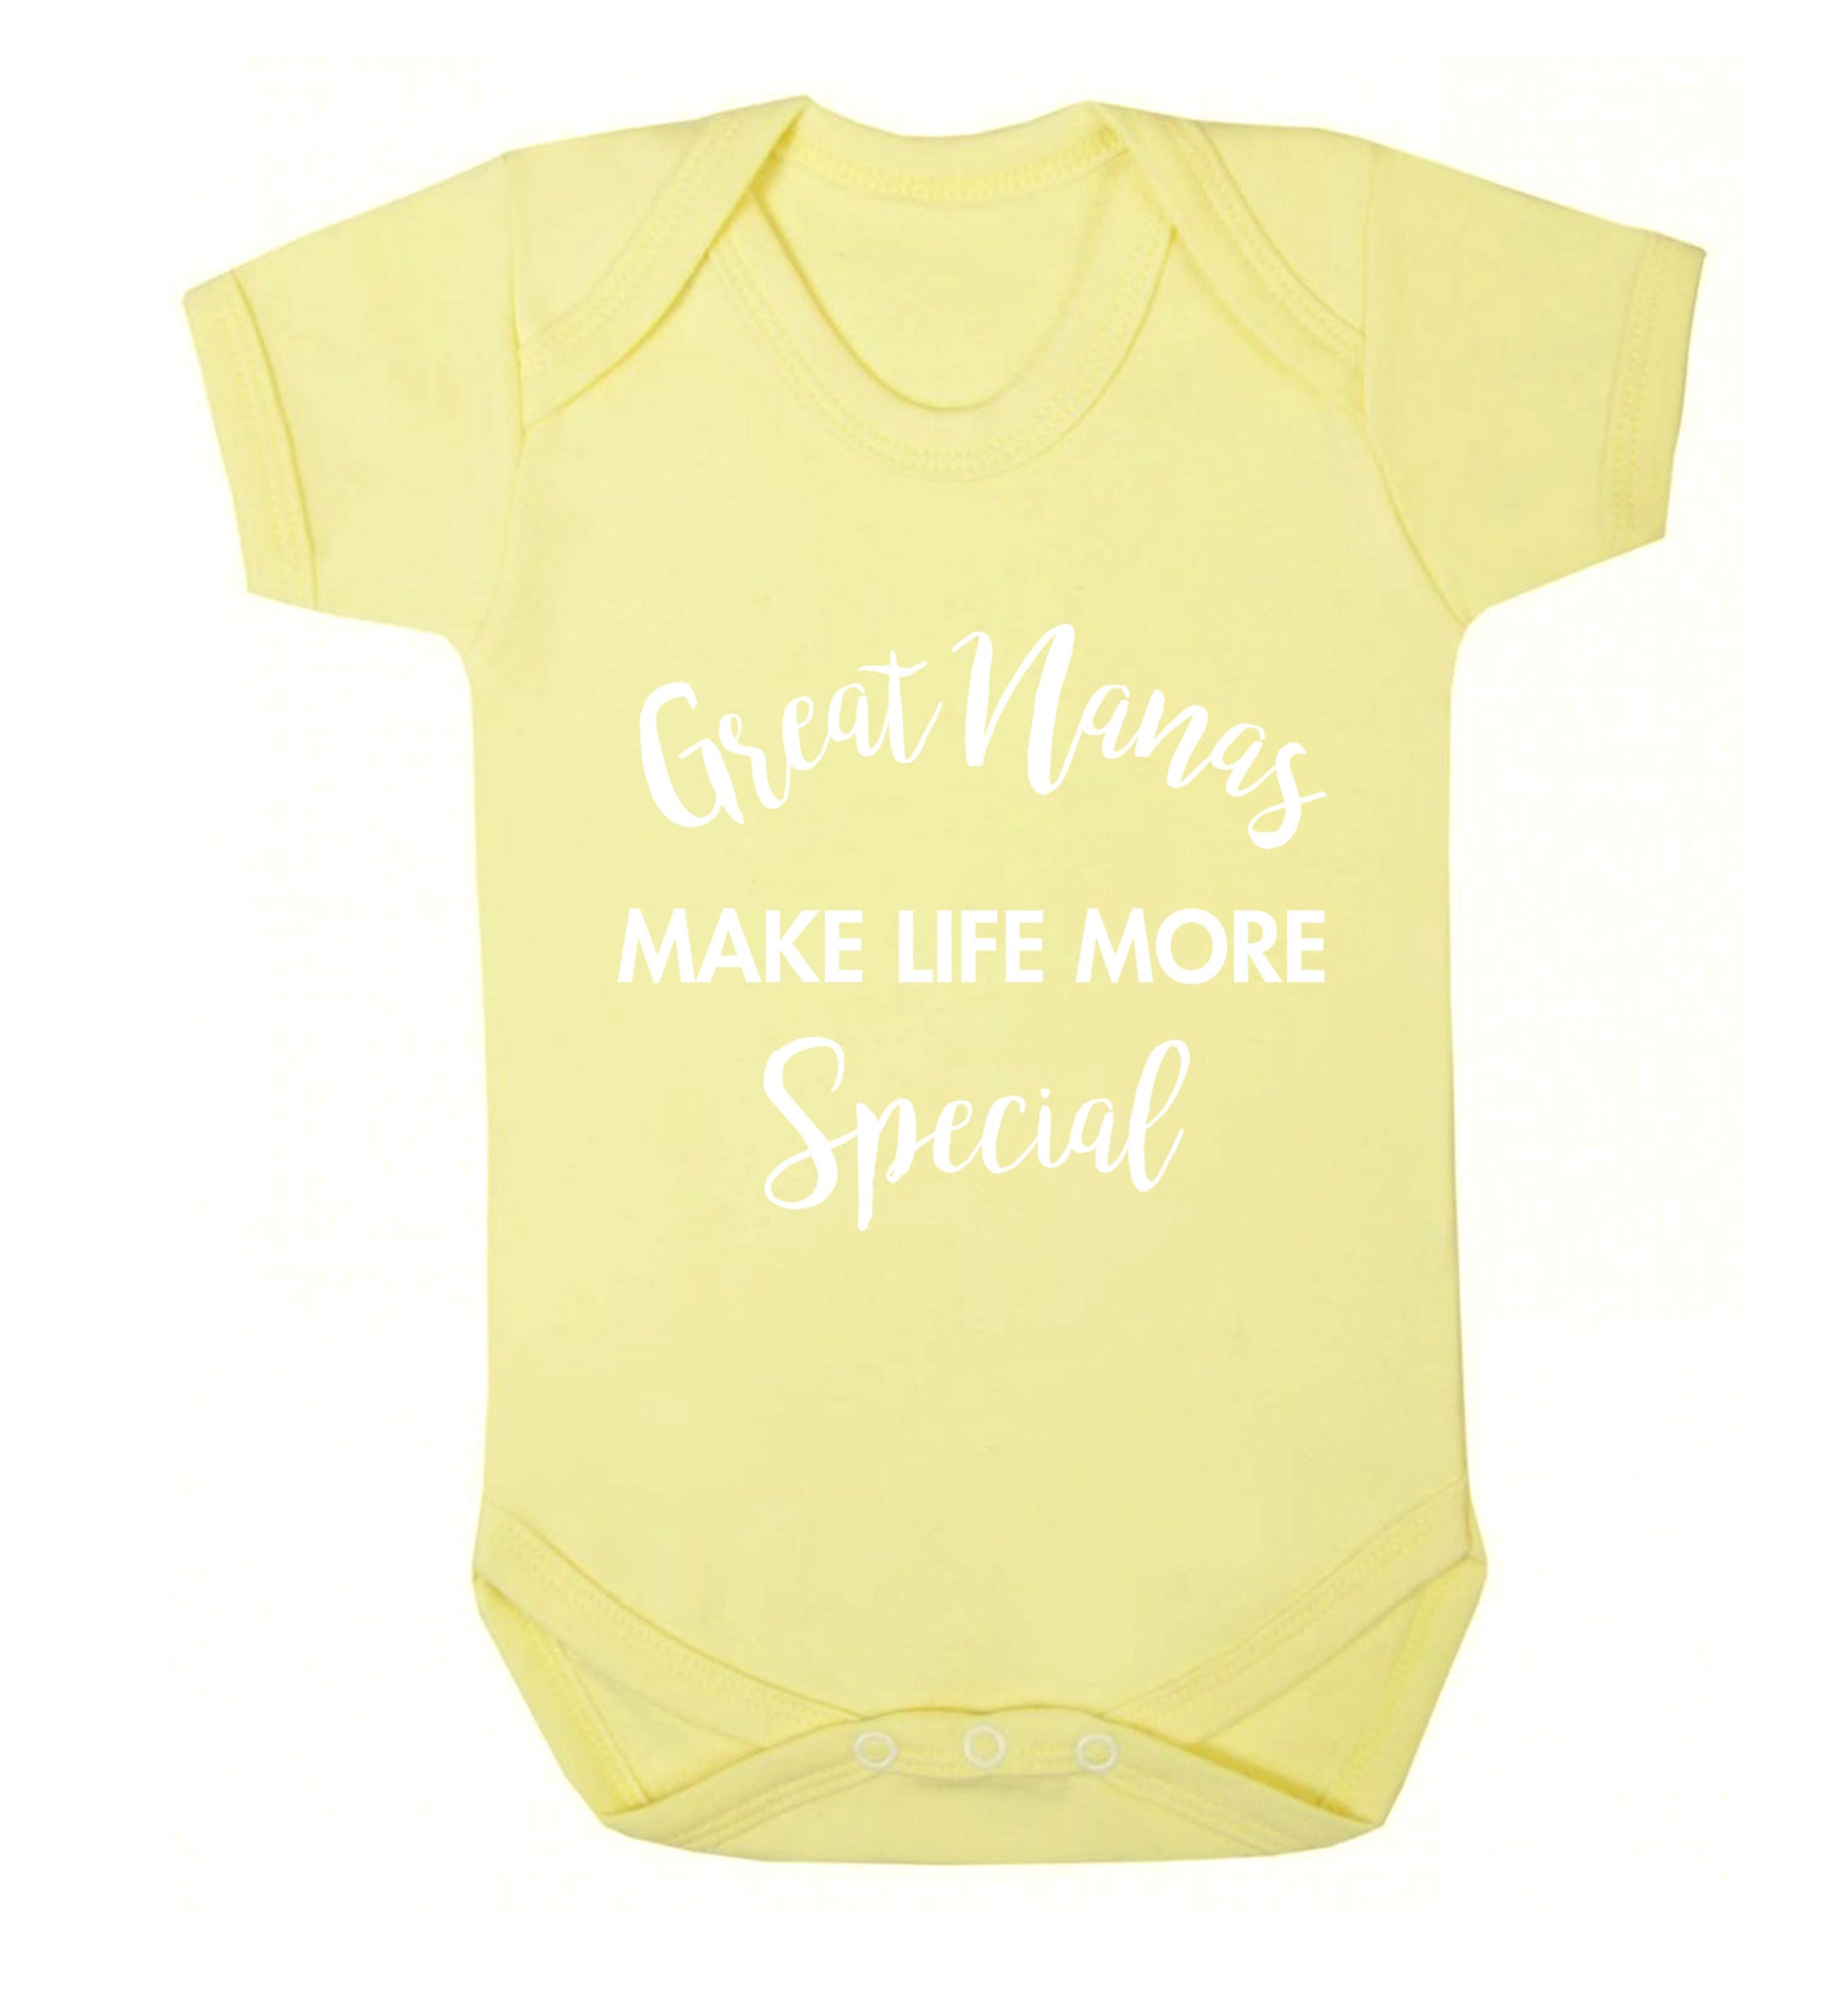 Great nanas make life more special Baby Vest pale yellow 18-24 months